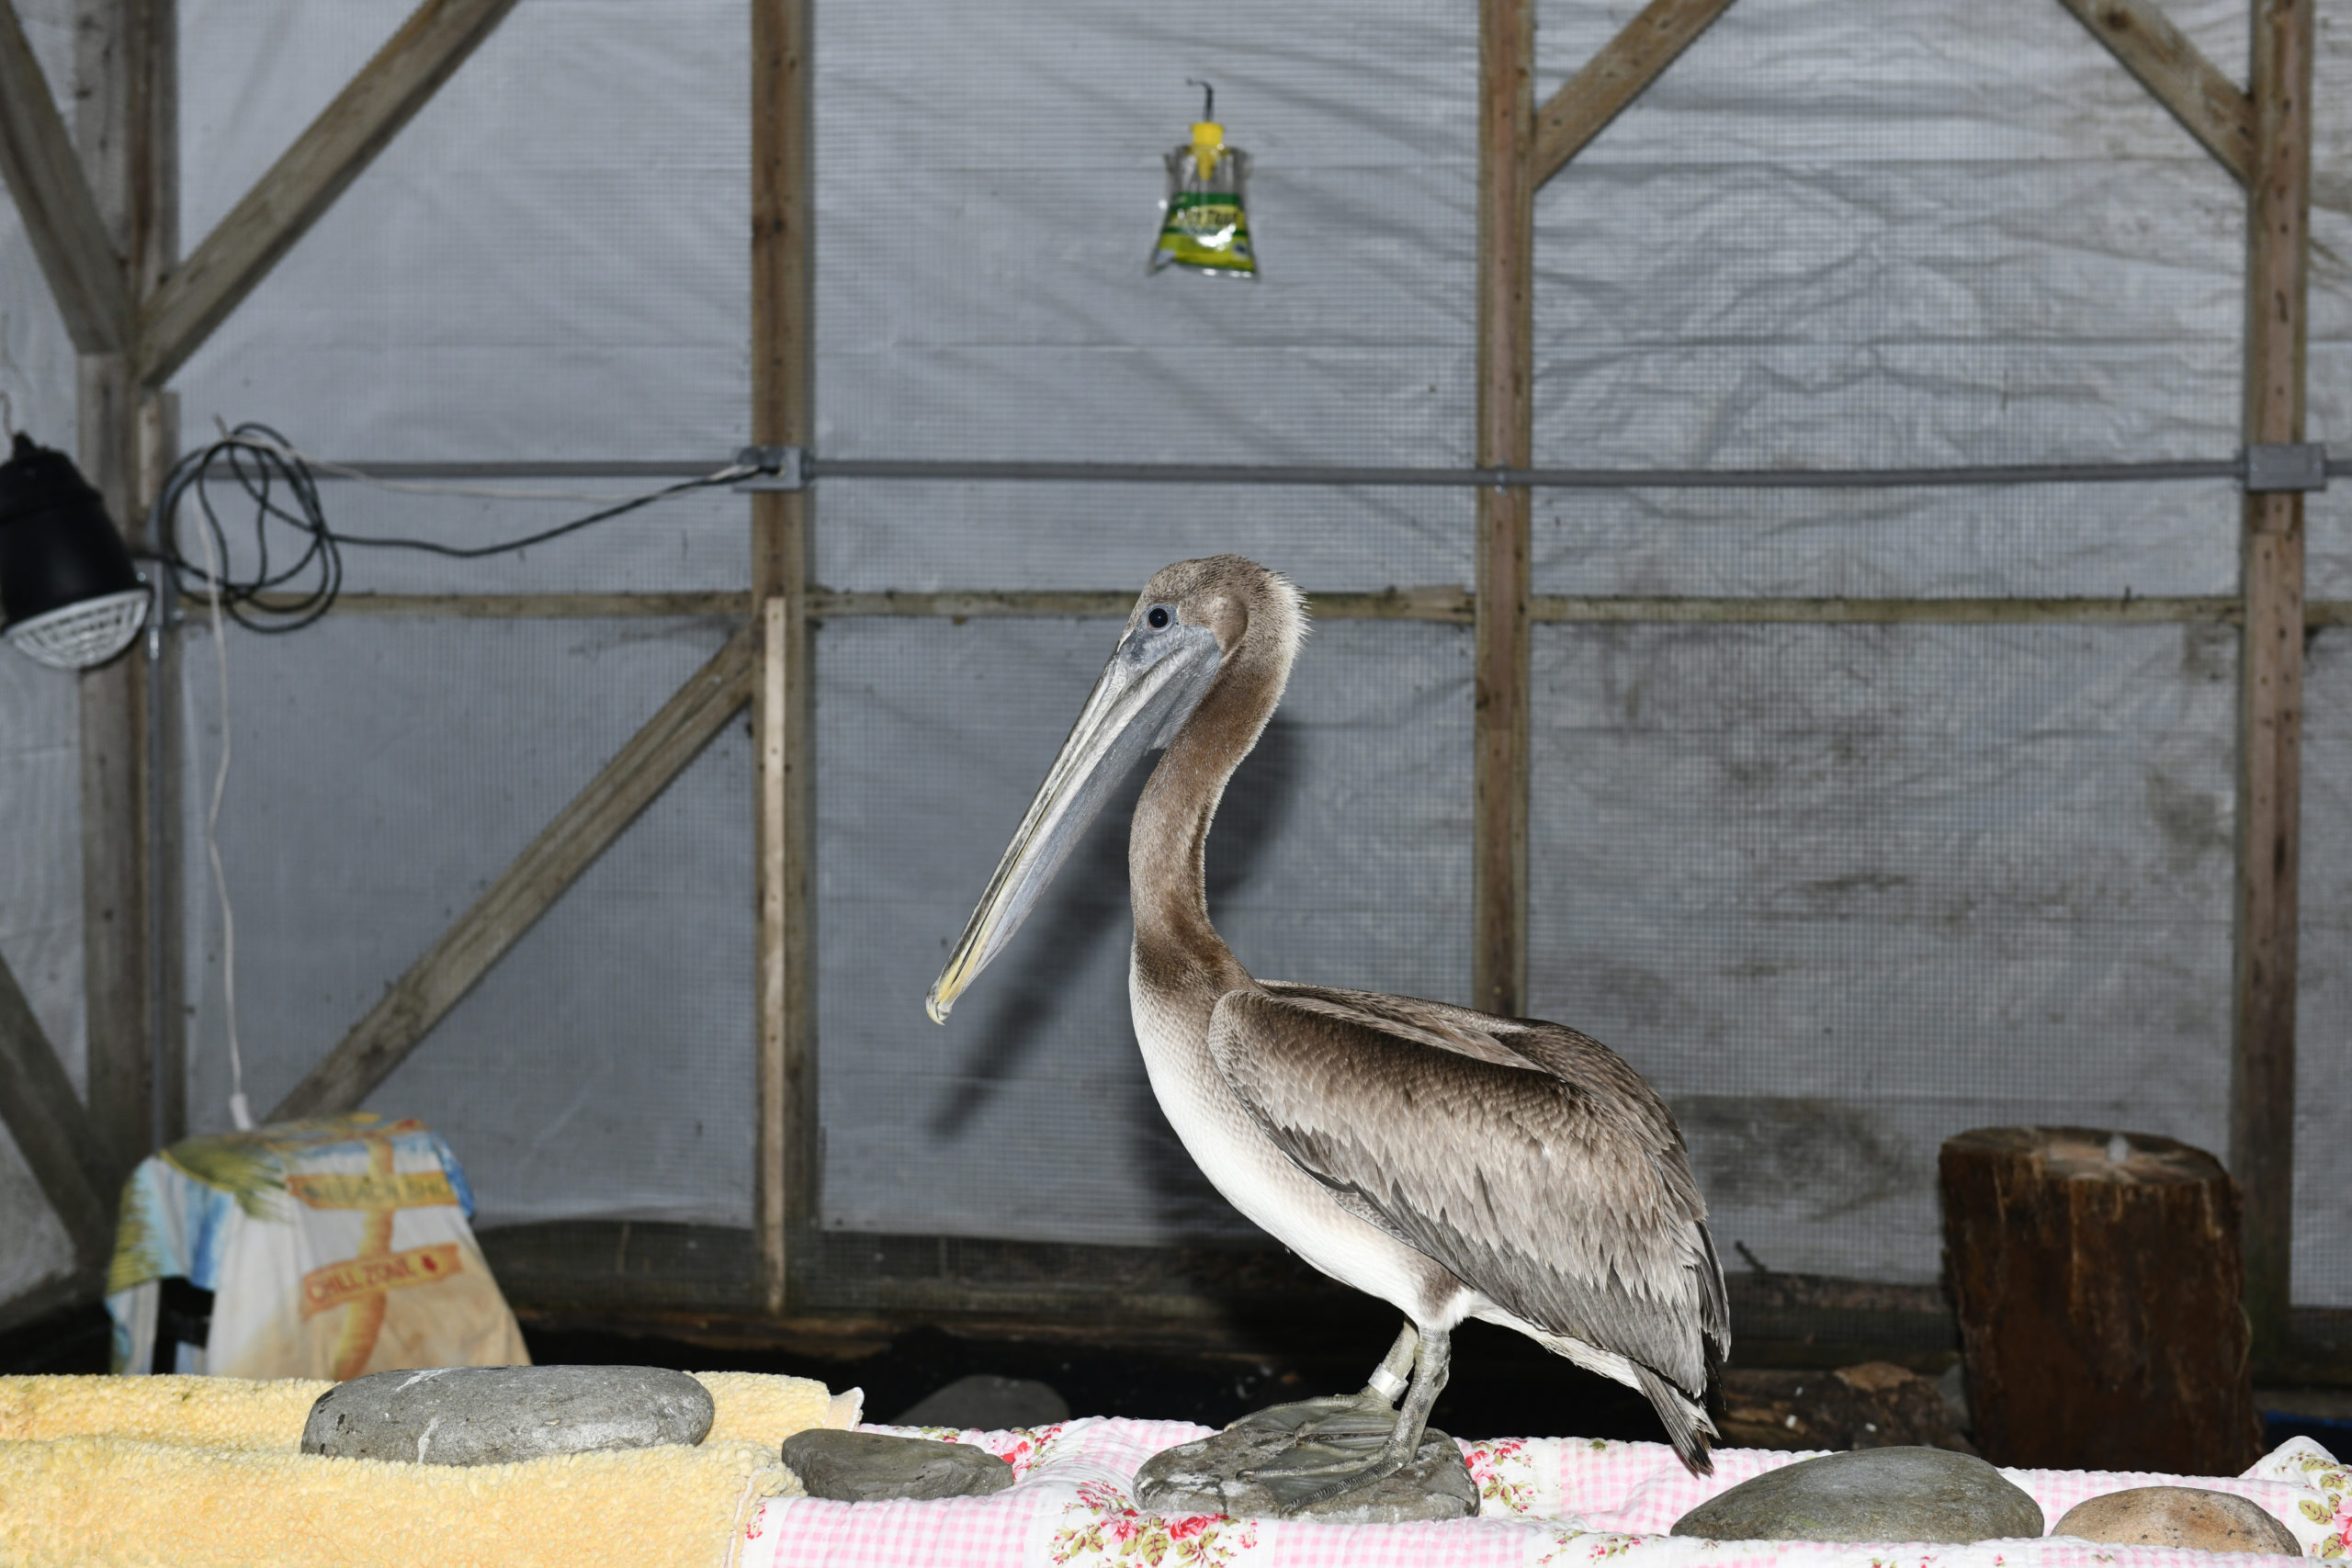 One of the brown pelicans that were rescued in Montauk recuperates at the Evelyn Alexander Wildlife Rescue Center in Hampton Bays on Thursday. DANA SHAW